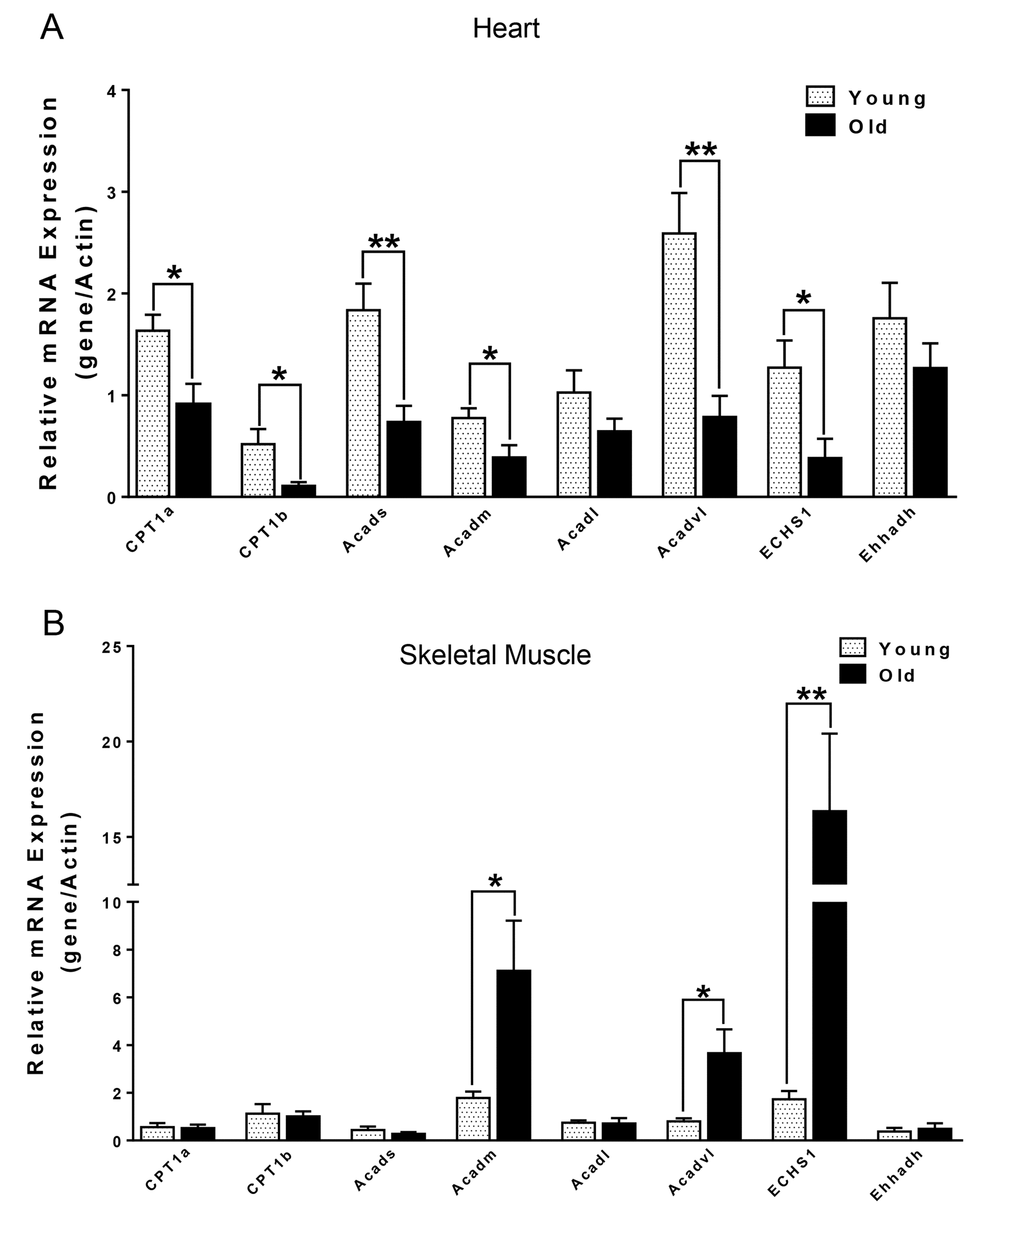 mRNA expression of CPT1α and β-oxidation enzymes in heart (A) and skeletal muscle (B) from young and old mice. Values are means±SEM for 6 young and 5 old mice in each group. *P 